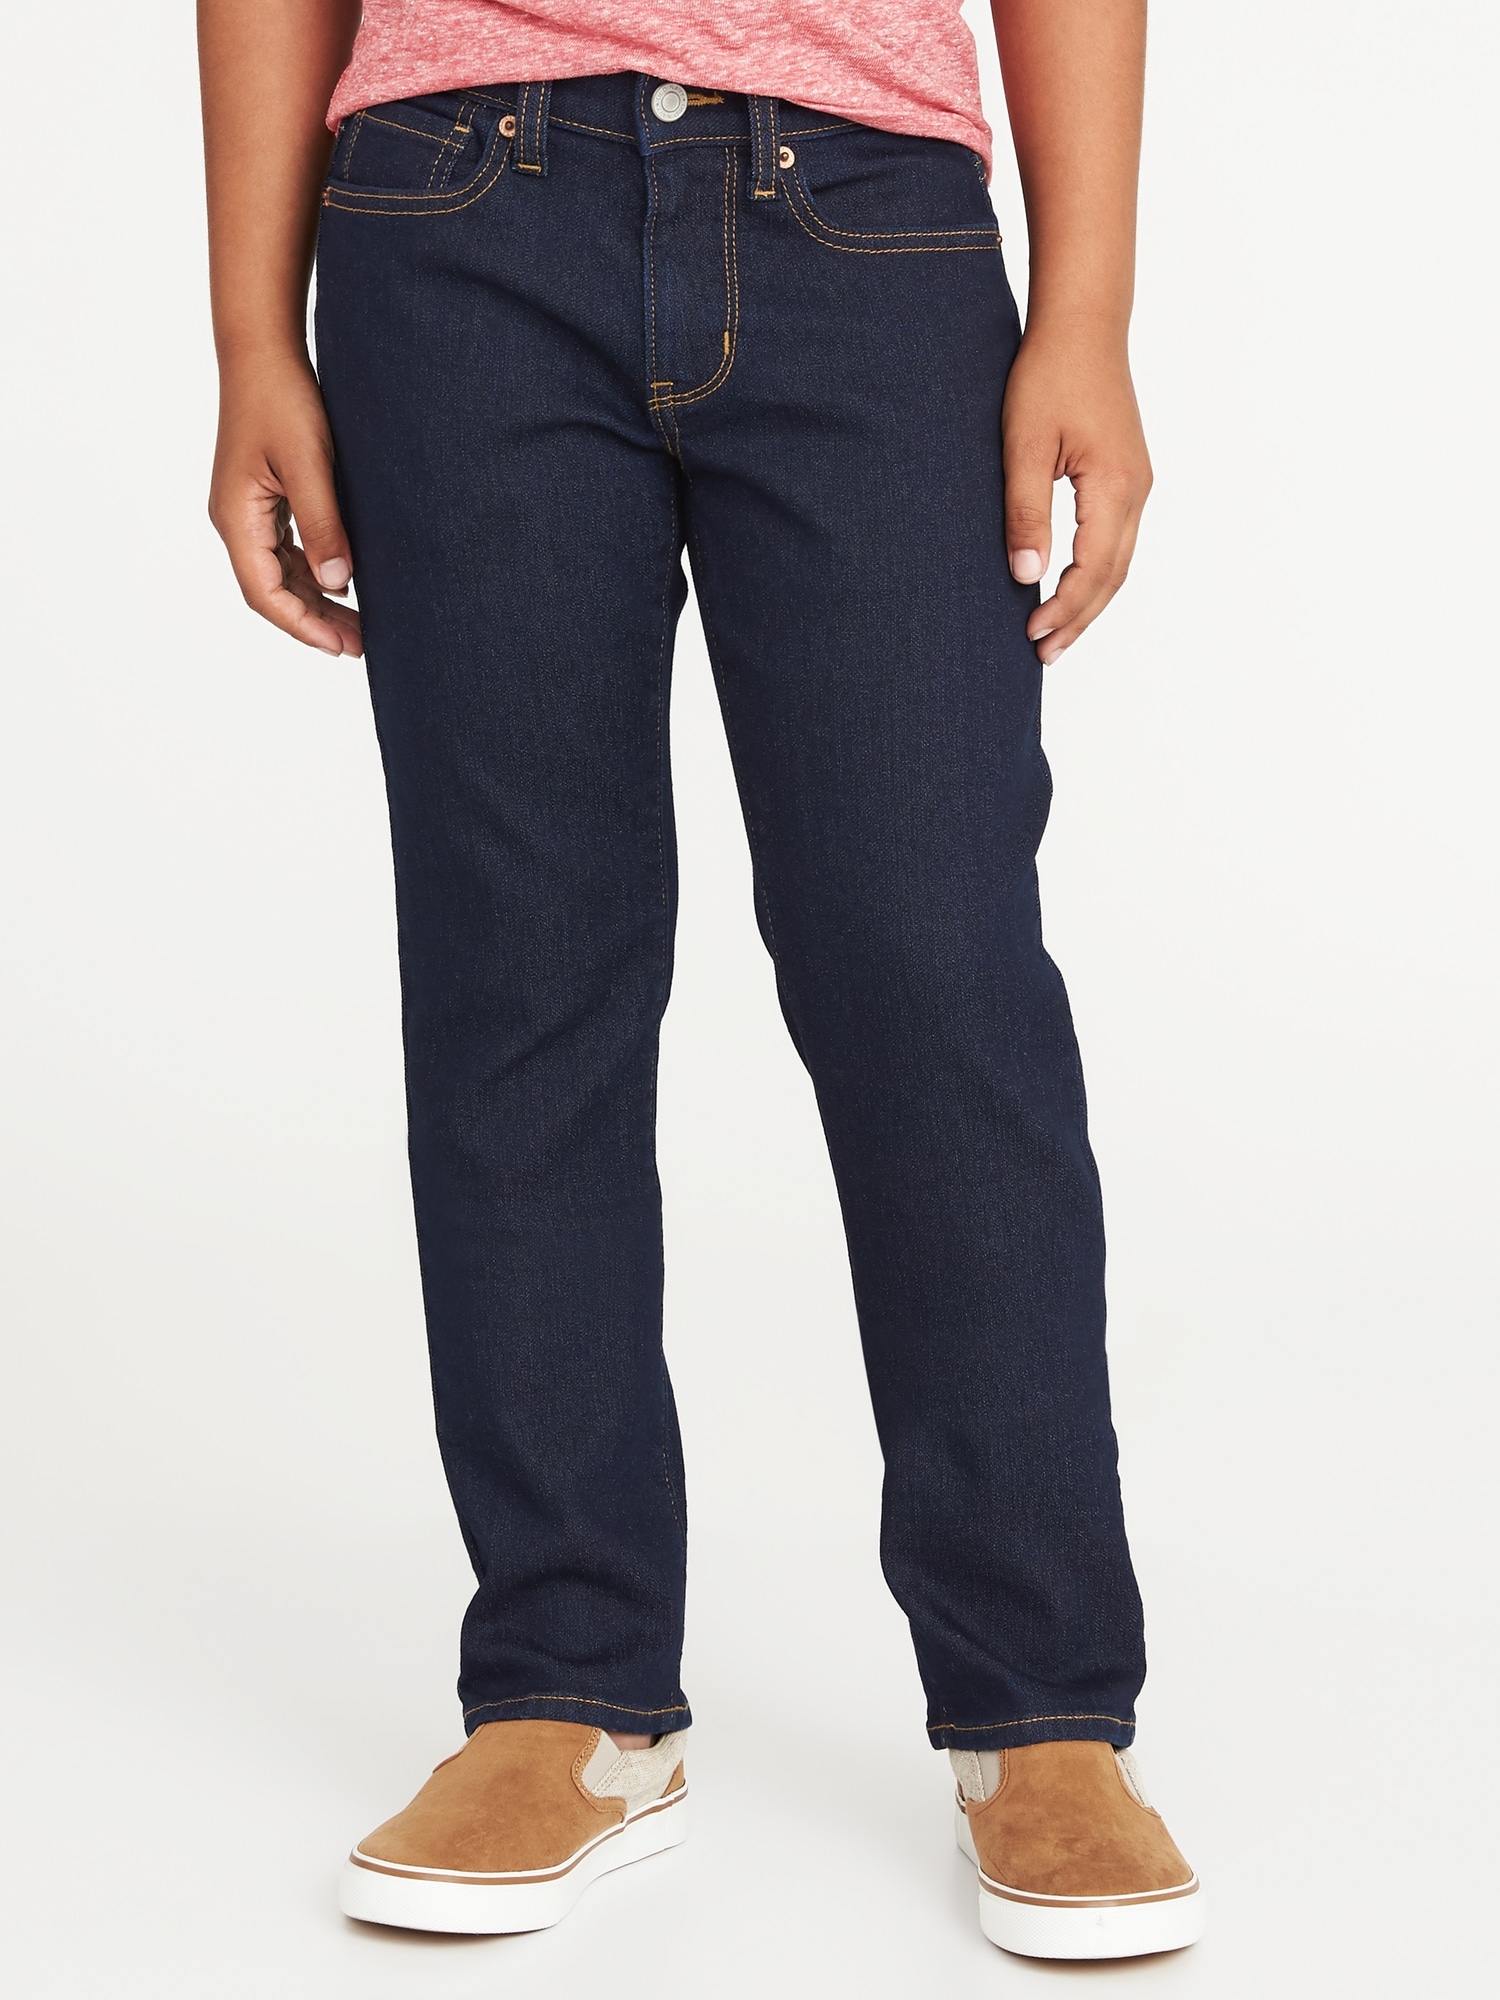 24/7 Karate Built-In Flex Max Jeans for Boys | Old Navy